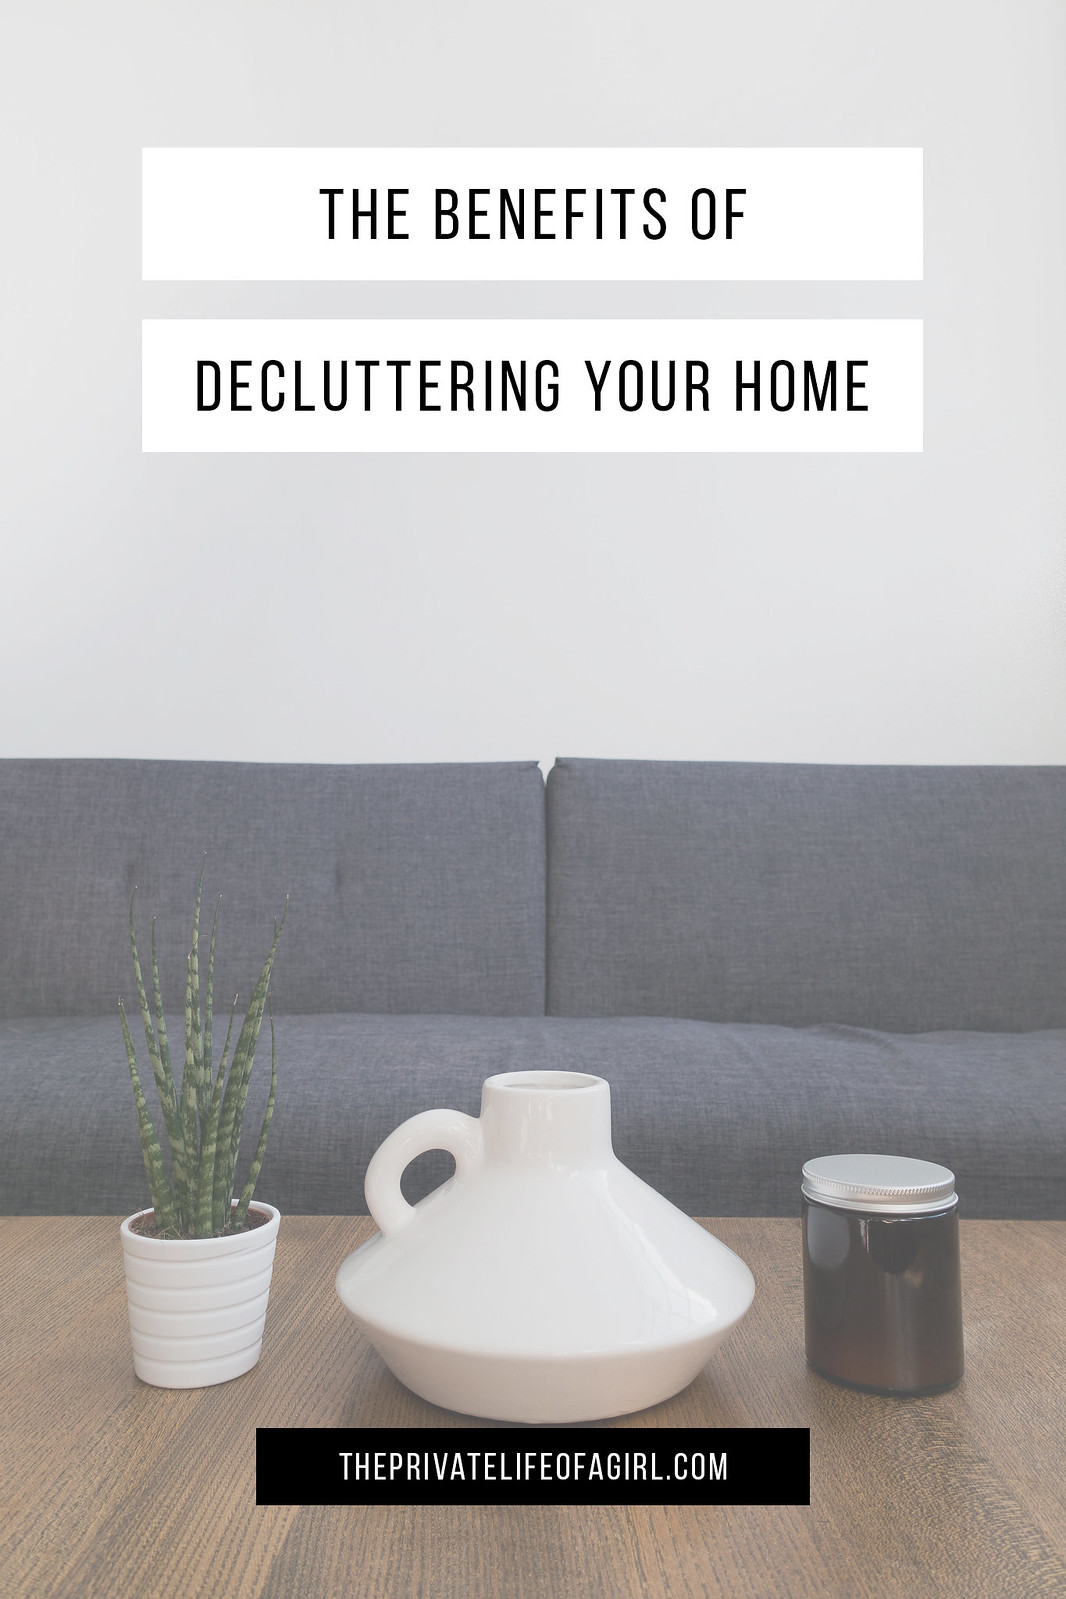 The Benefits Of Decluttering Your Home